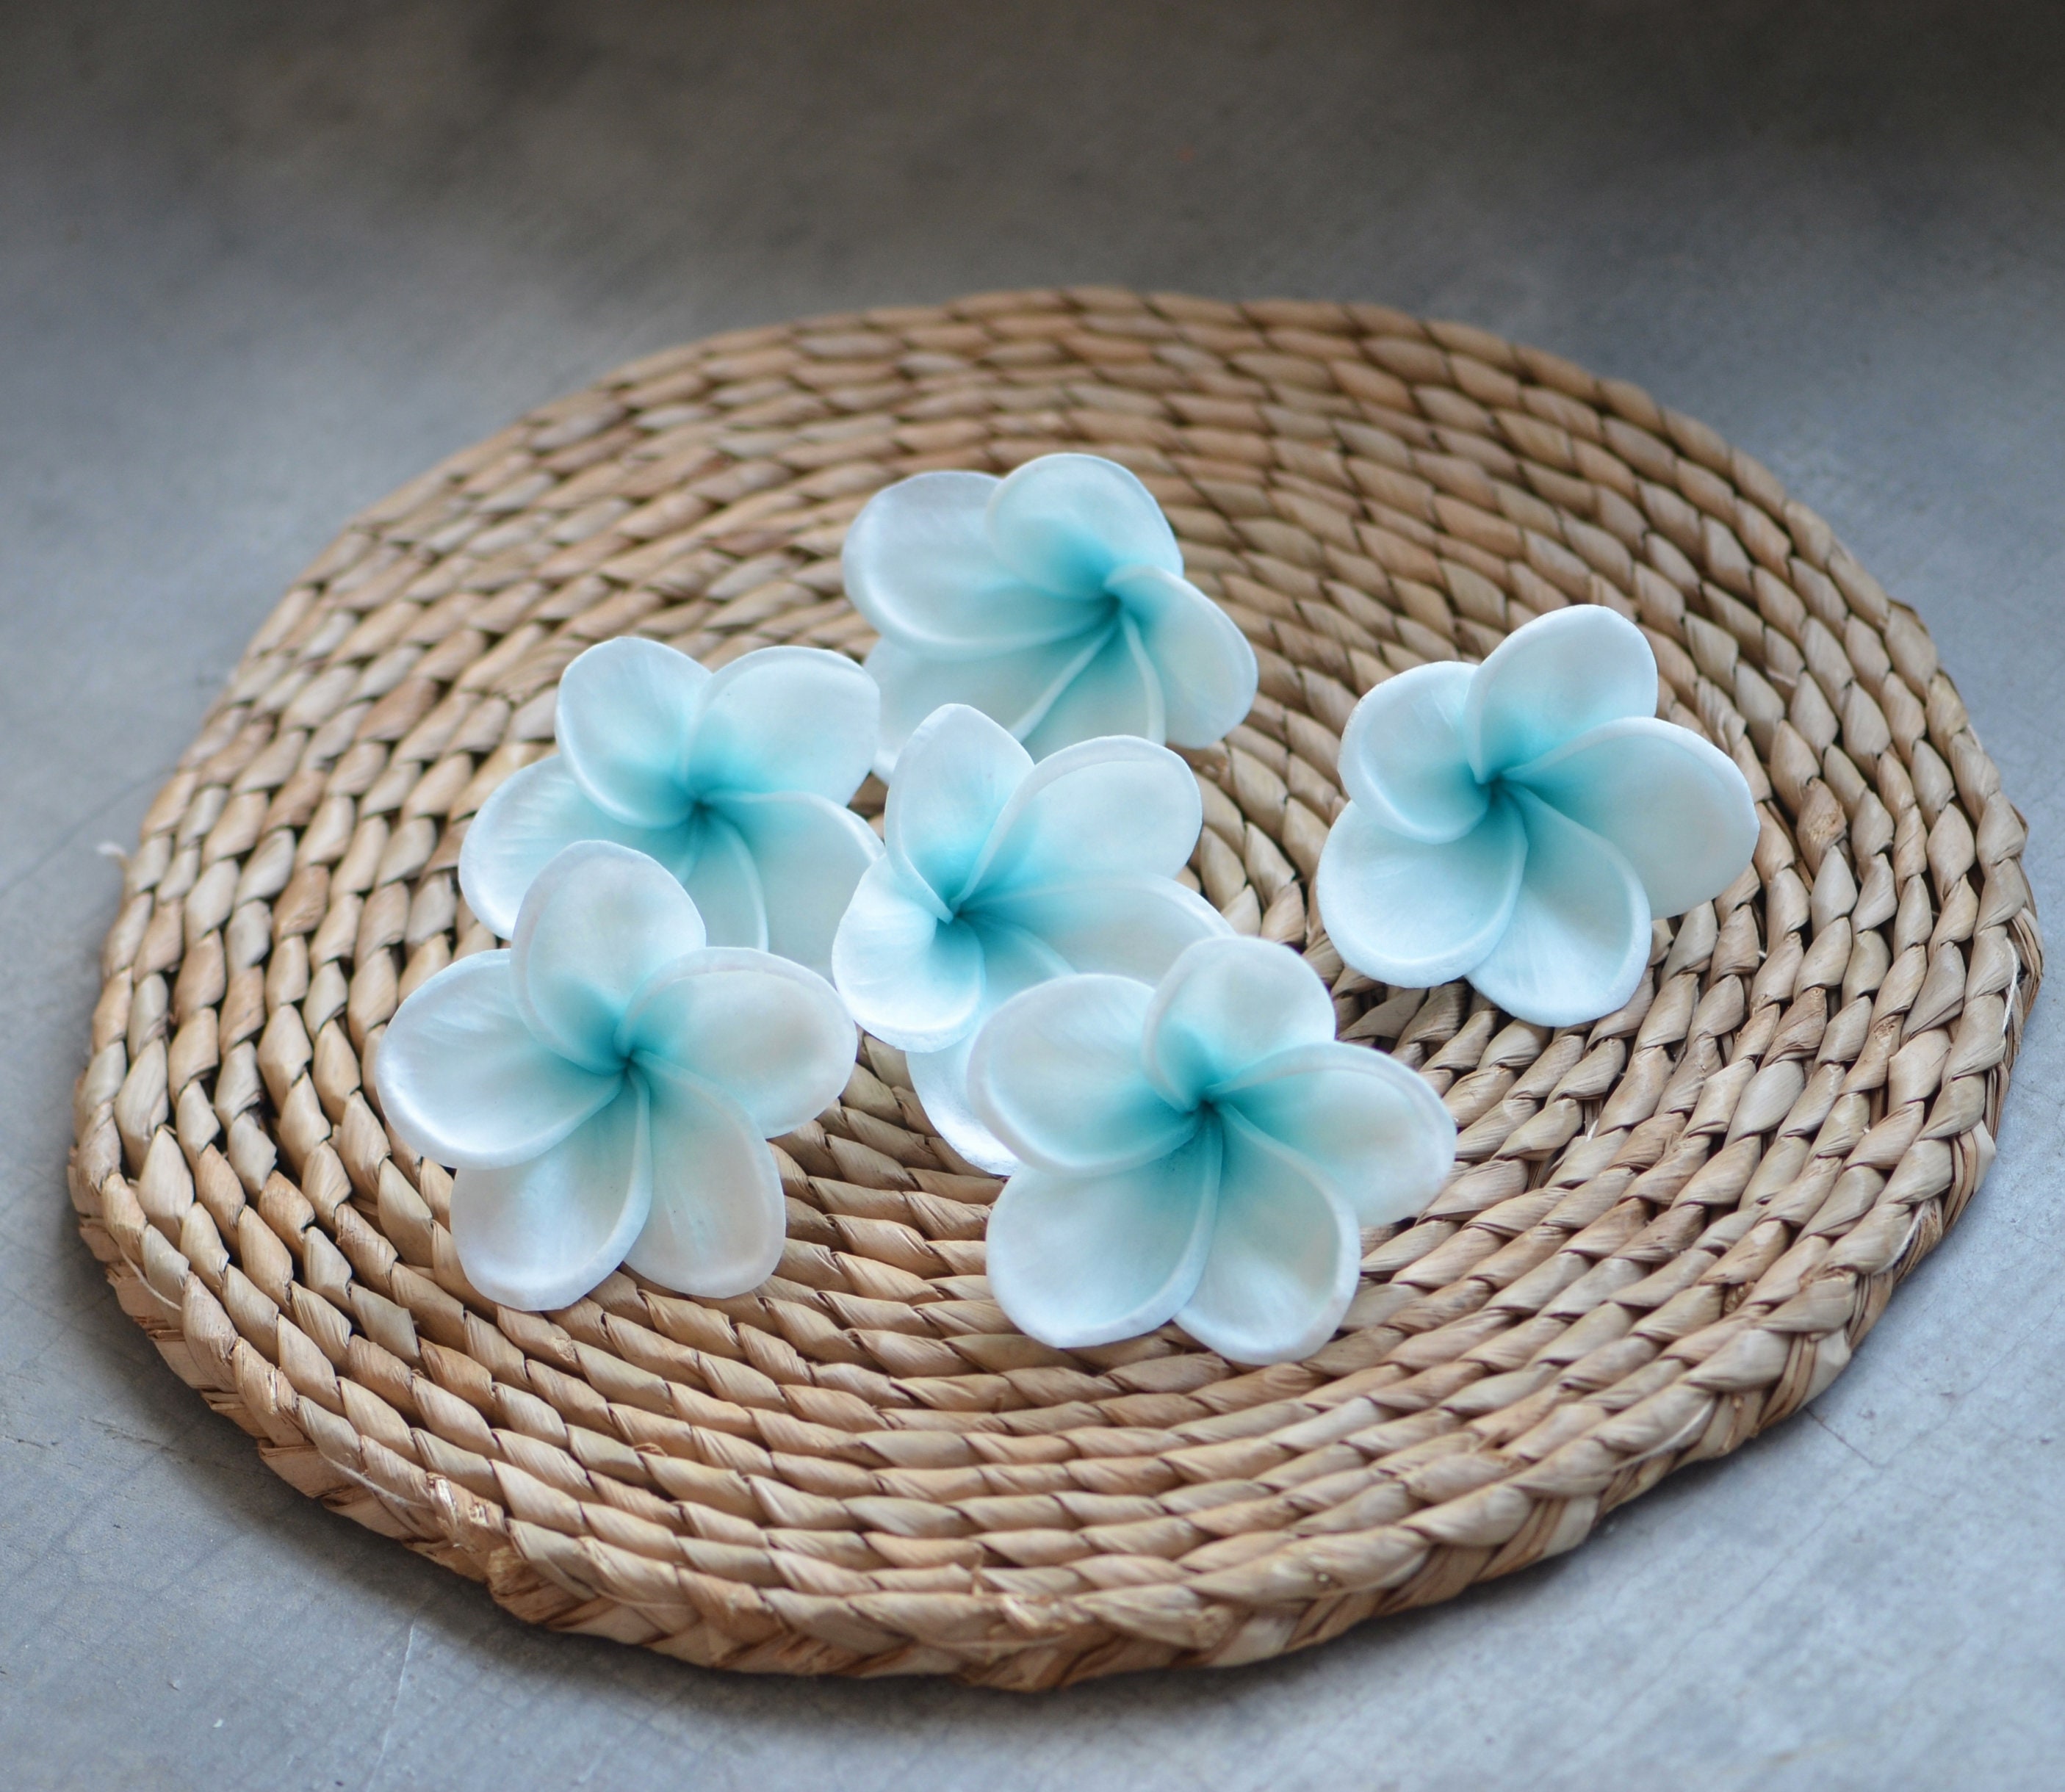 Aqua Blue Center Plumerias Natural Real Touch Flowers - Etsy